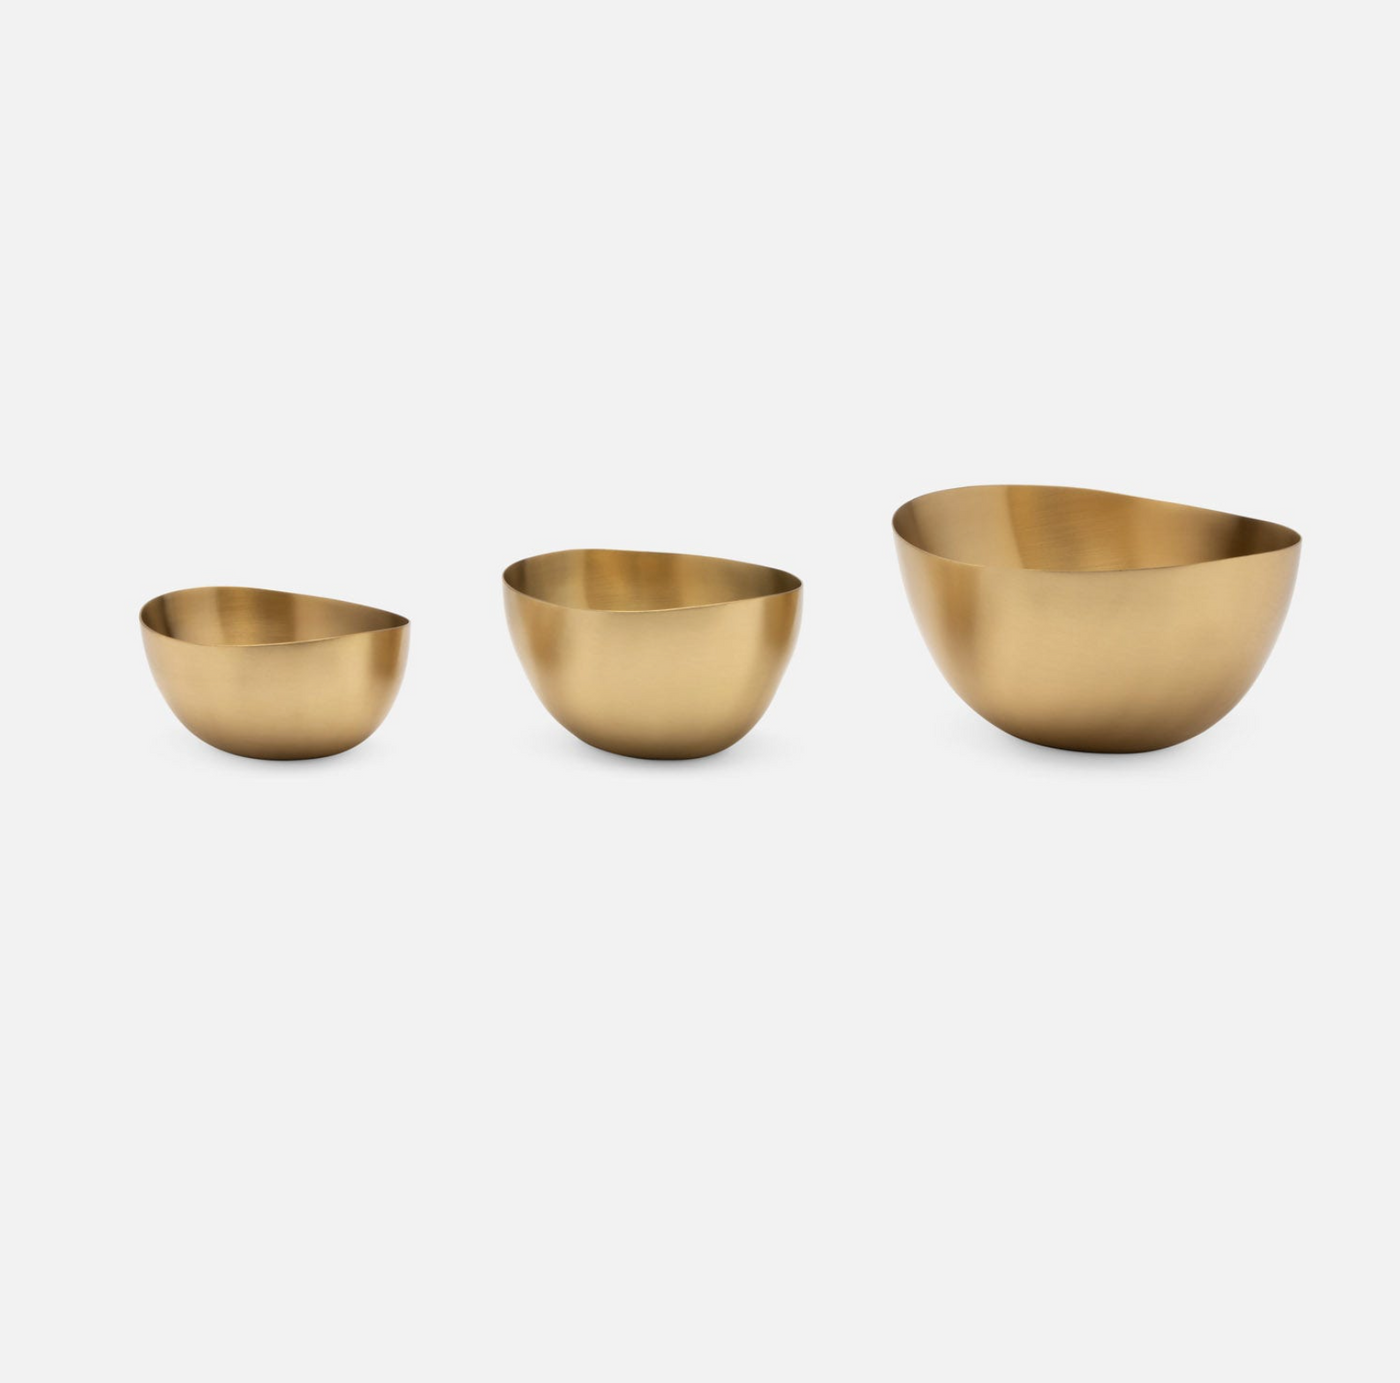 BOWL METAL SATIN BRASS (Available in 3 Sizes)